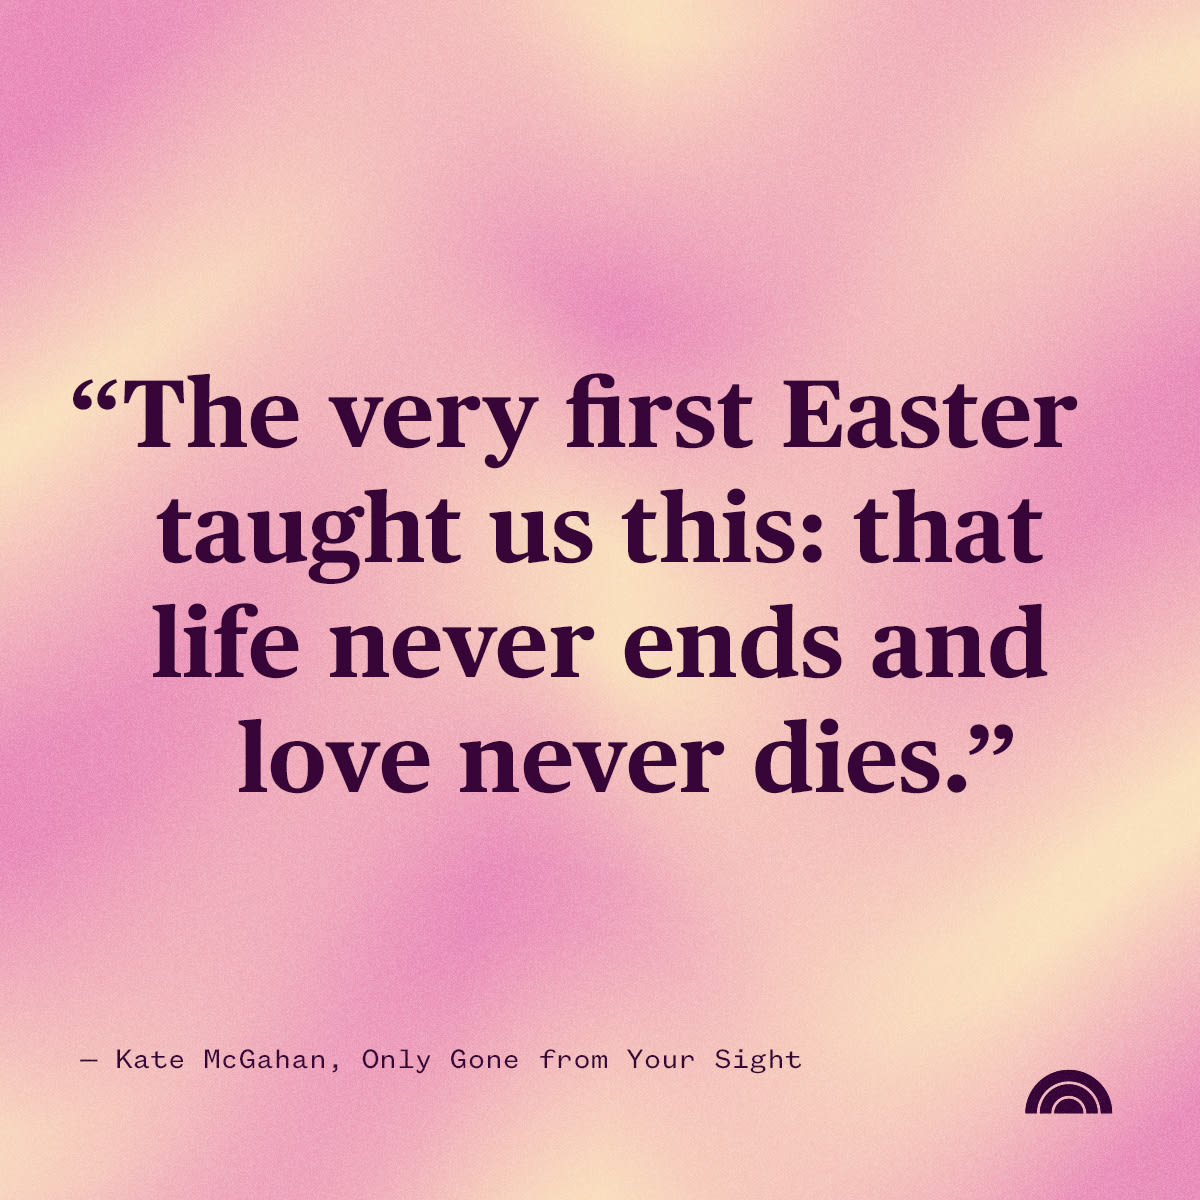 50 Best Easter Quotes and Sayings to Celebrate the Holiday